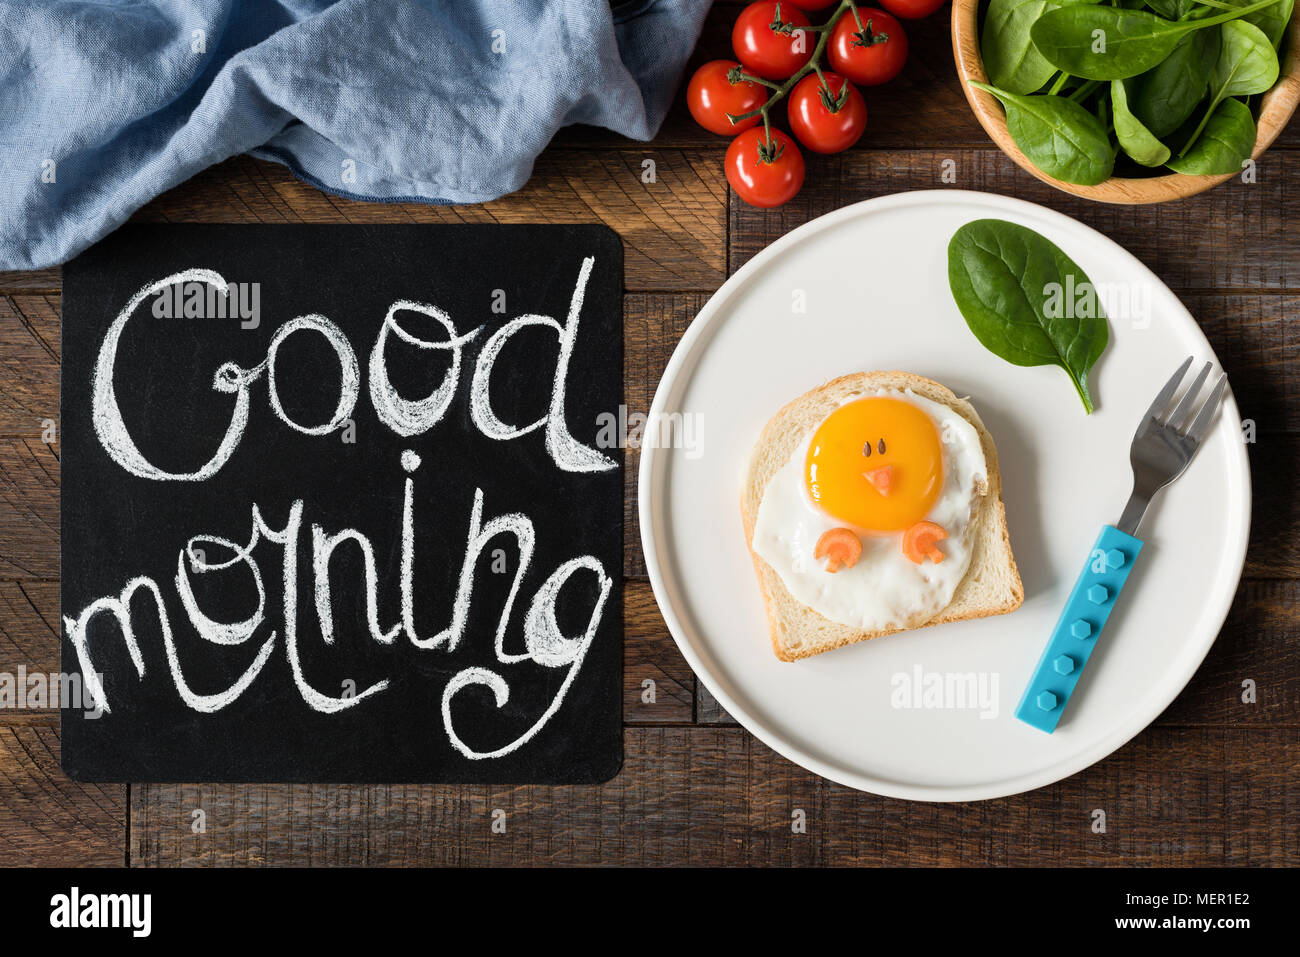 Funny sandwich chicken for kids on a plate. Black chalkboard with Good morning greeting, Healthy breakfast and healthy eating concept. Wooden table ba Stock Photo